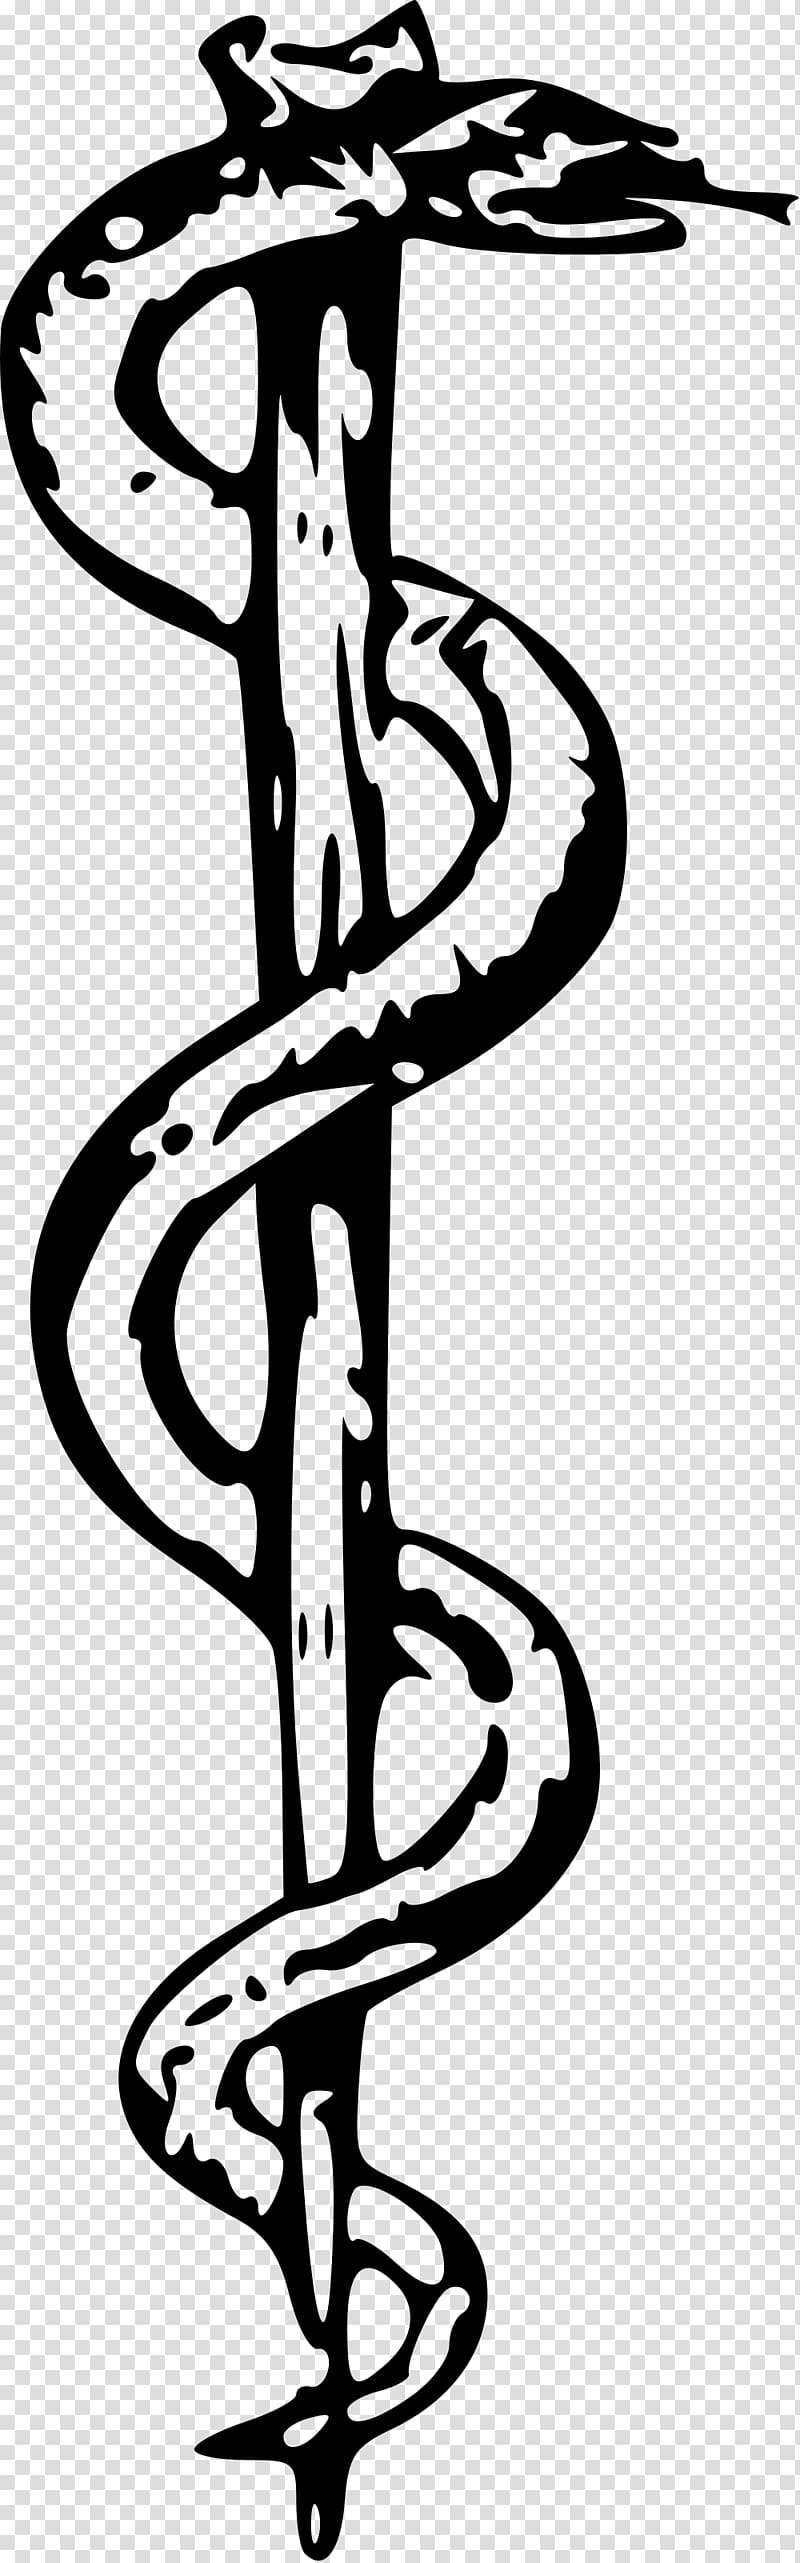 Staff of Hermes Rod of Asclepius Caduceus as a symbol of medicine, snake transparent background PNG clipart